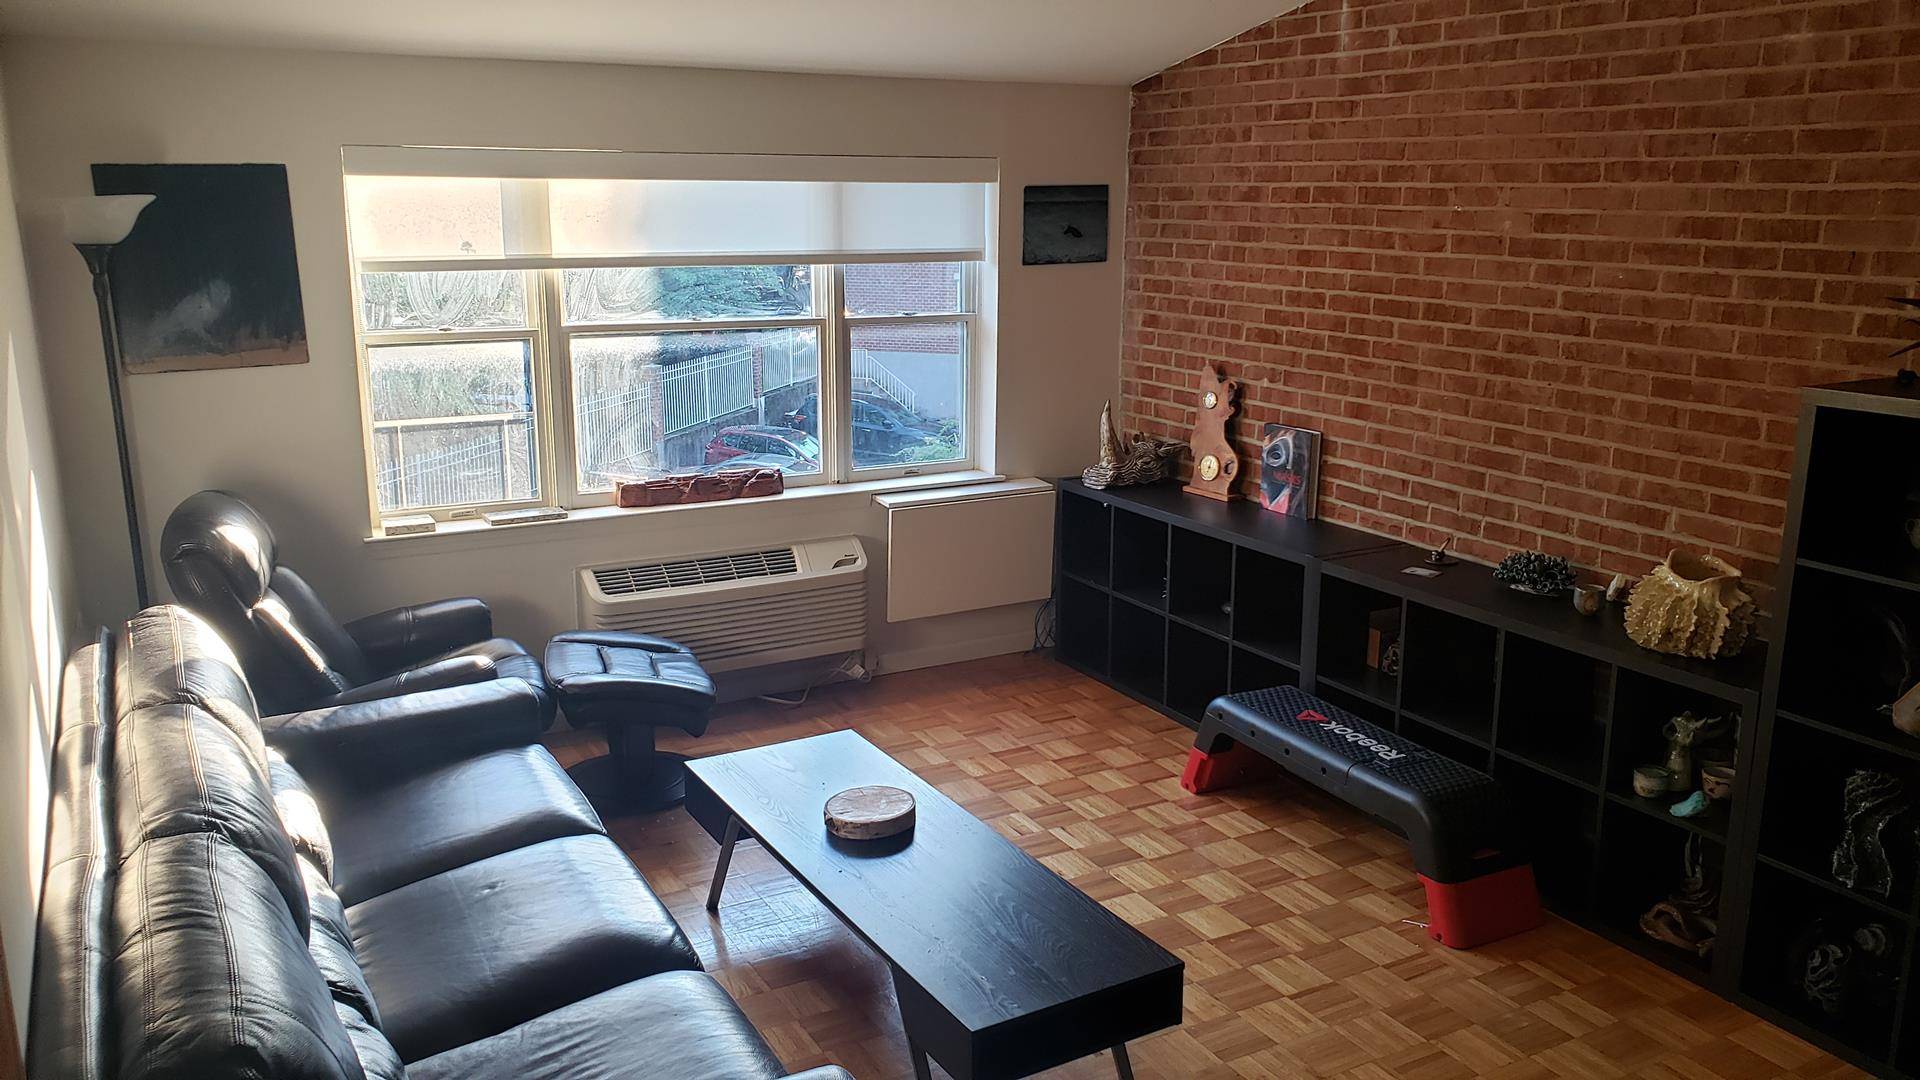 Available immediately. Loft like, bright two bedroom condo right across from Prospect Park.